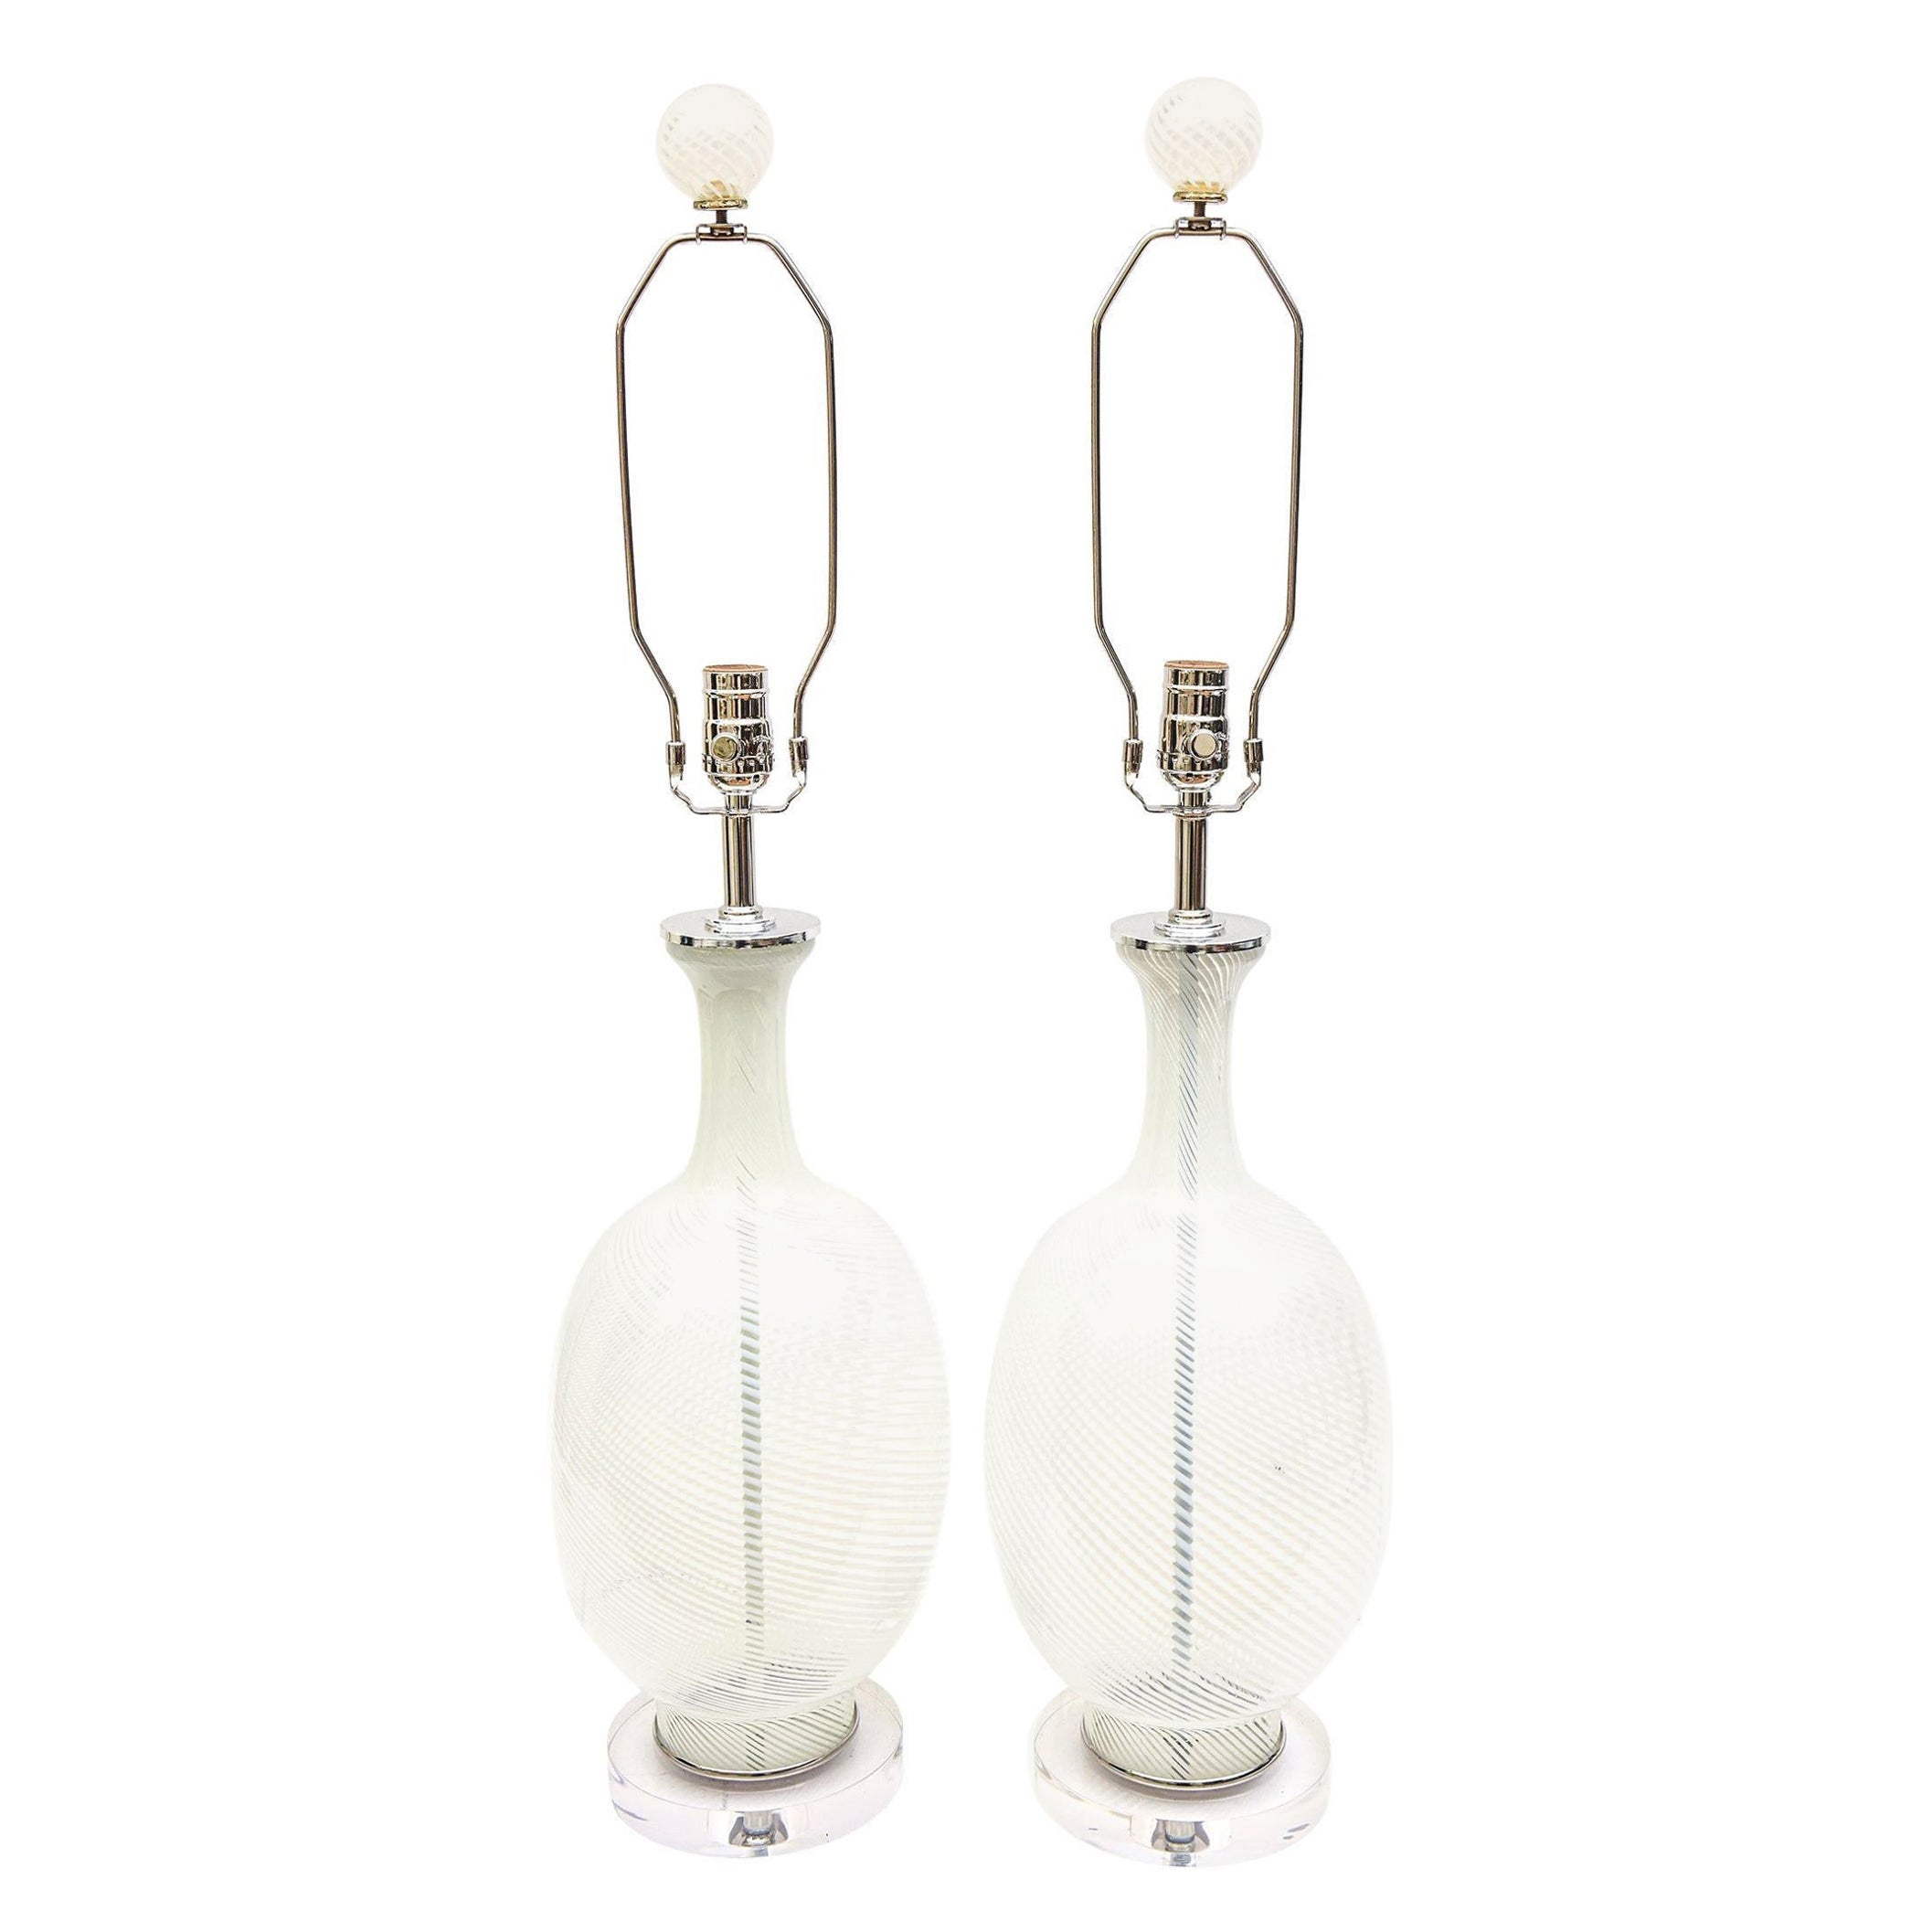 Aureliano Toso Murano Vintage White Swirled Glass Lamps with Glass Finials Pair 